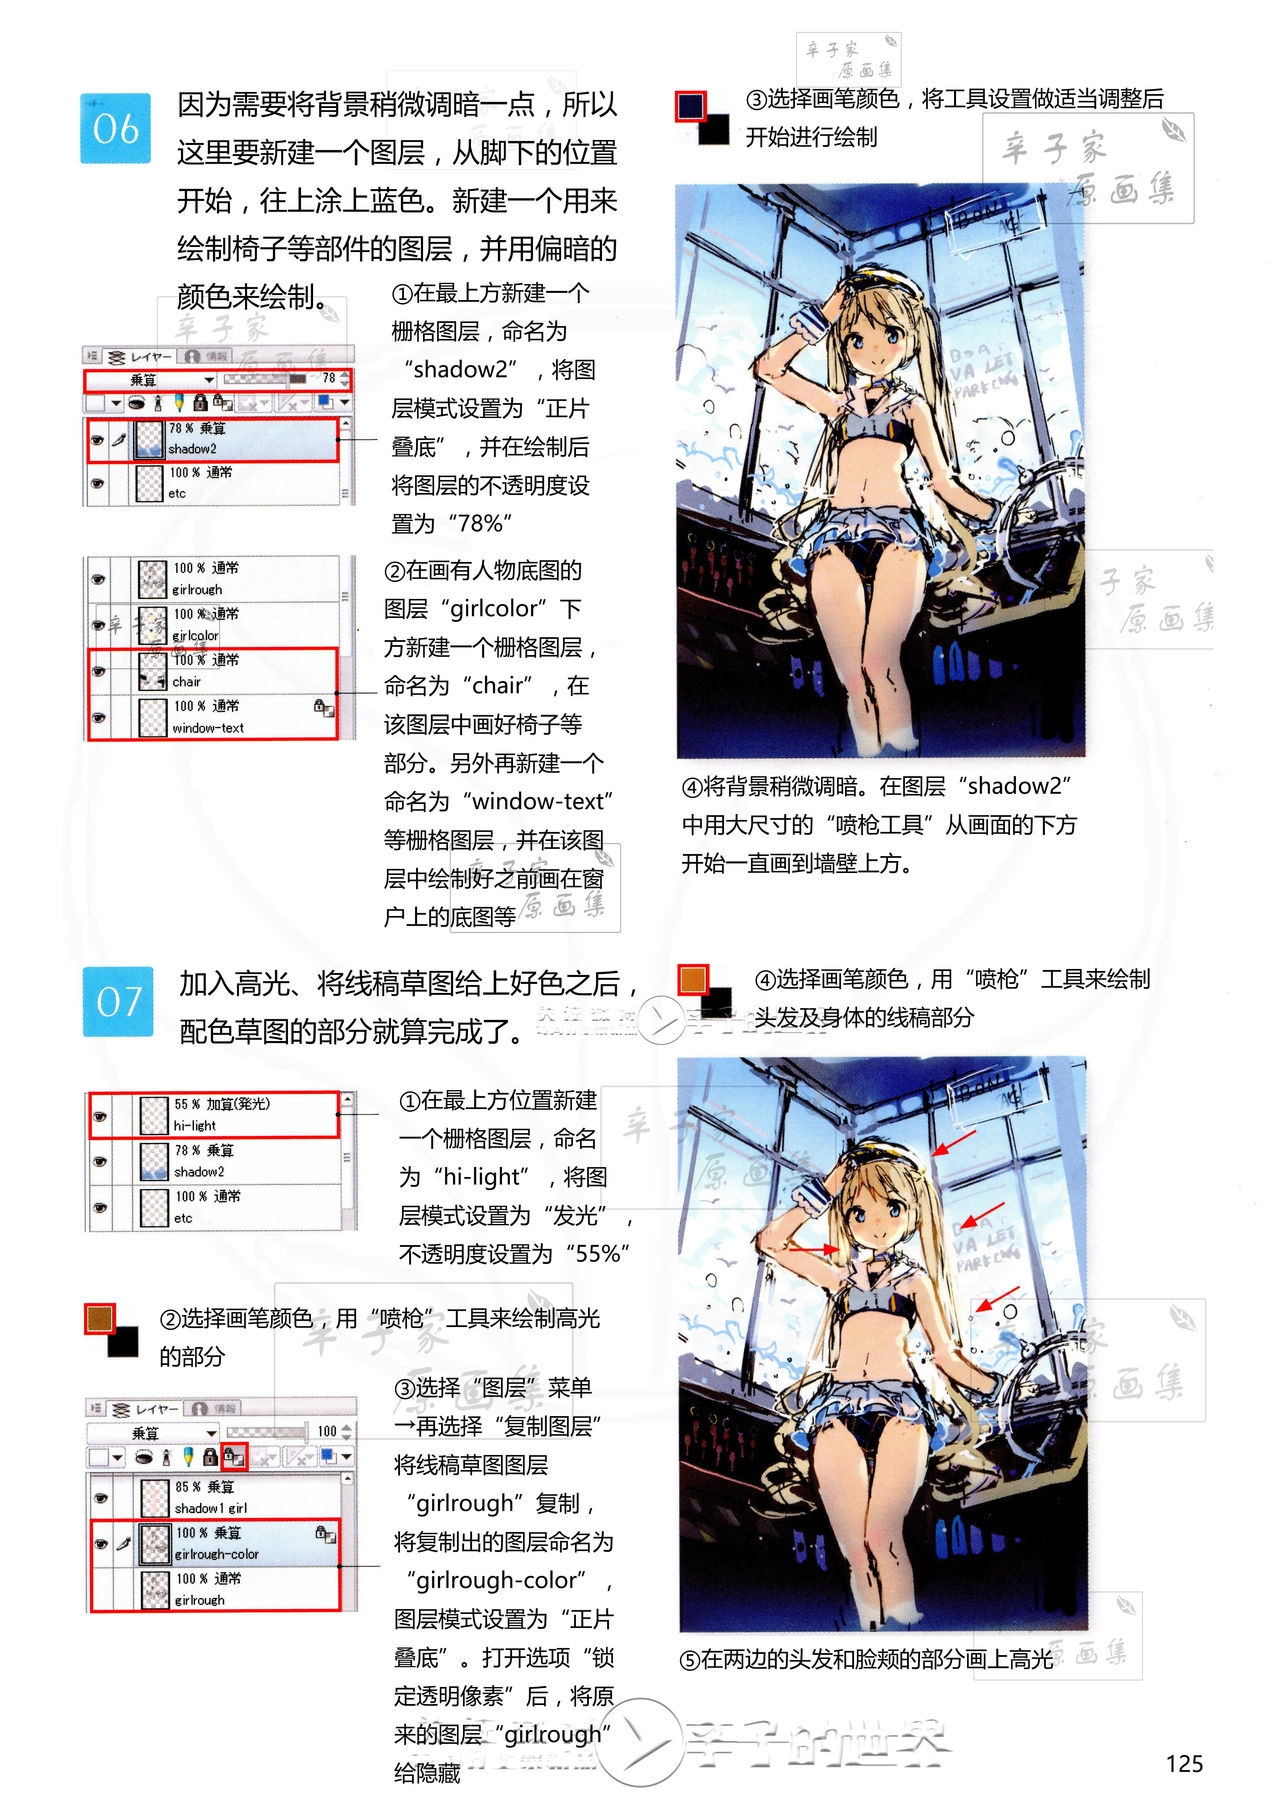 [Anmi] Lets Make ★ Character CG illustration techniques vol.9 [Chinese] 123